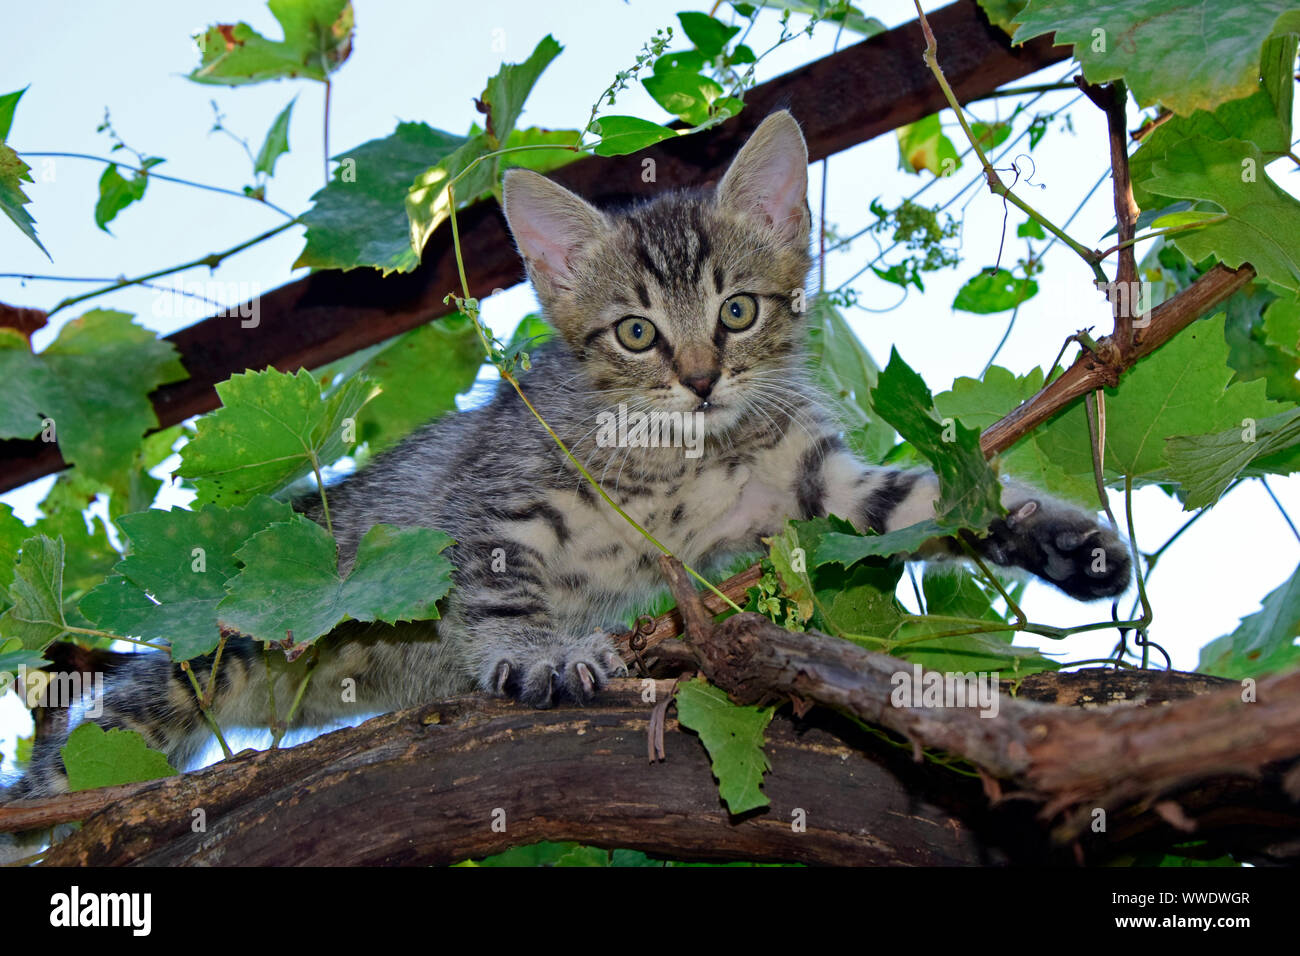 Grey tabby kitten climbing on grapevine and making eye contact Stock Photo